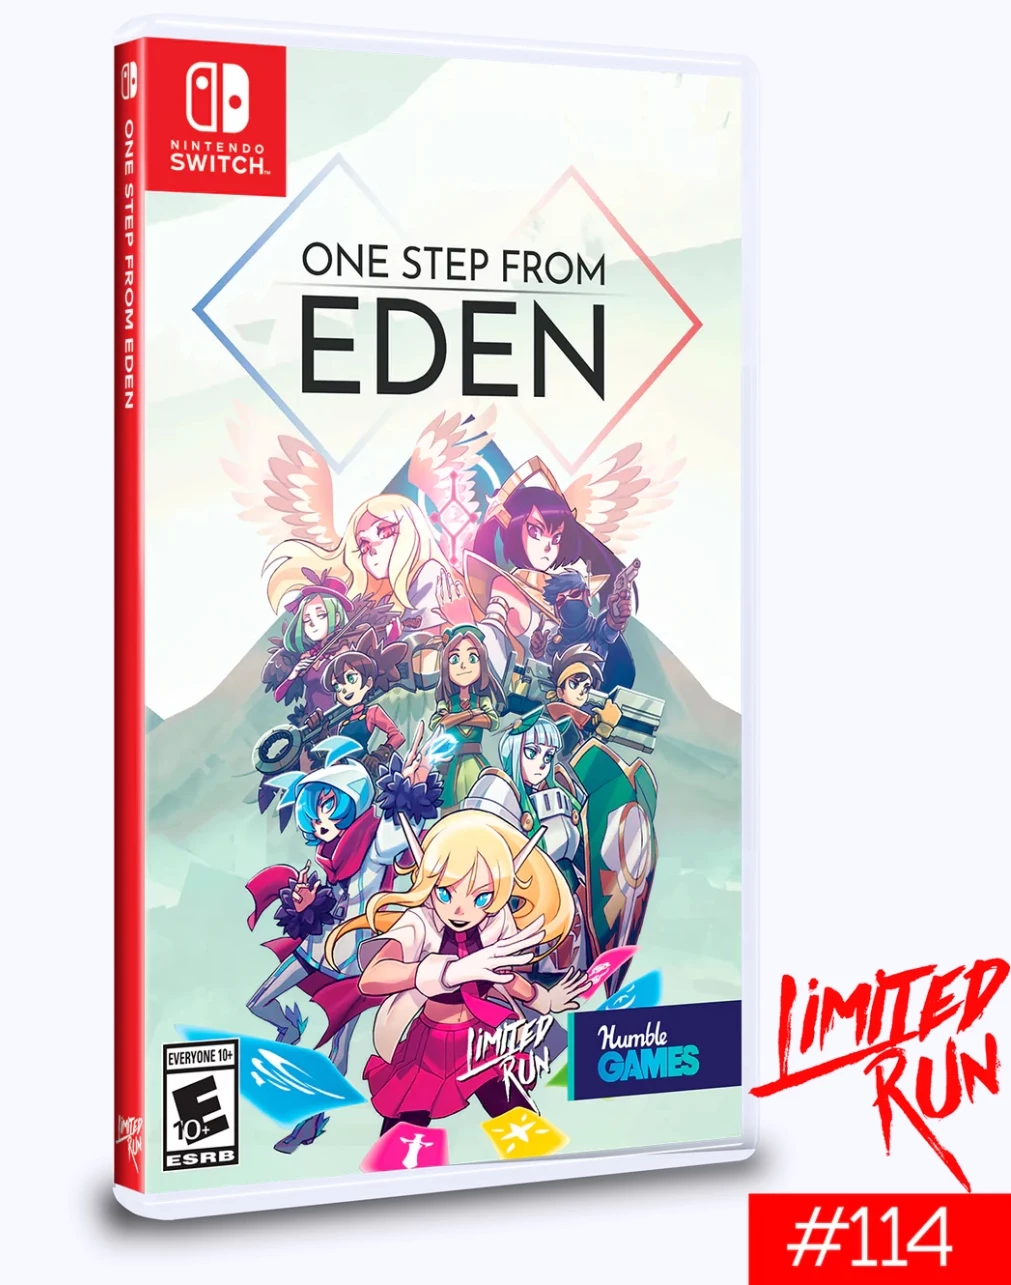 One Step From Eden (Limited Run) (Switch), Humble Games